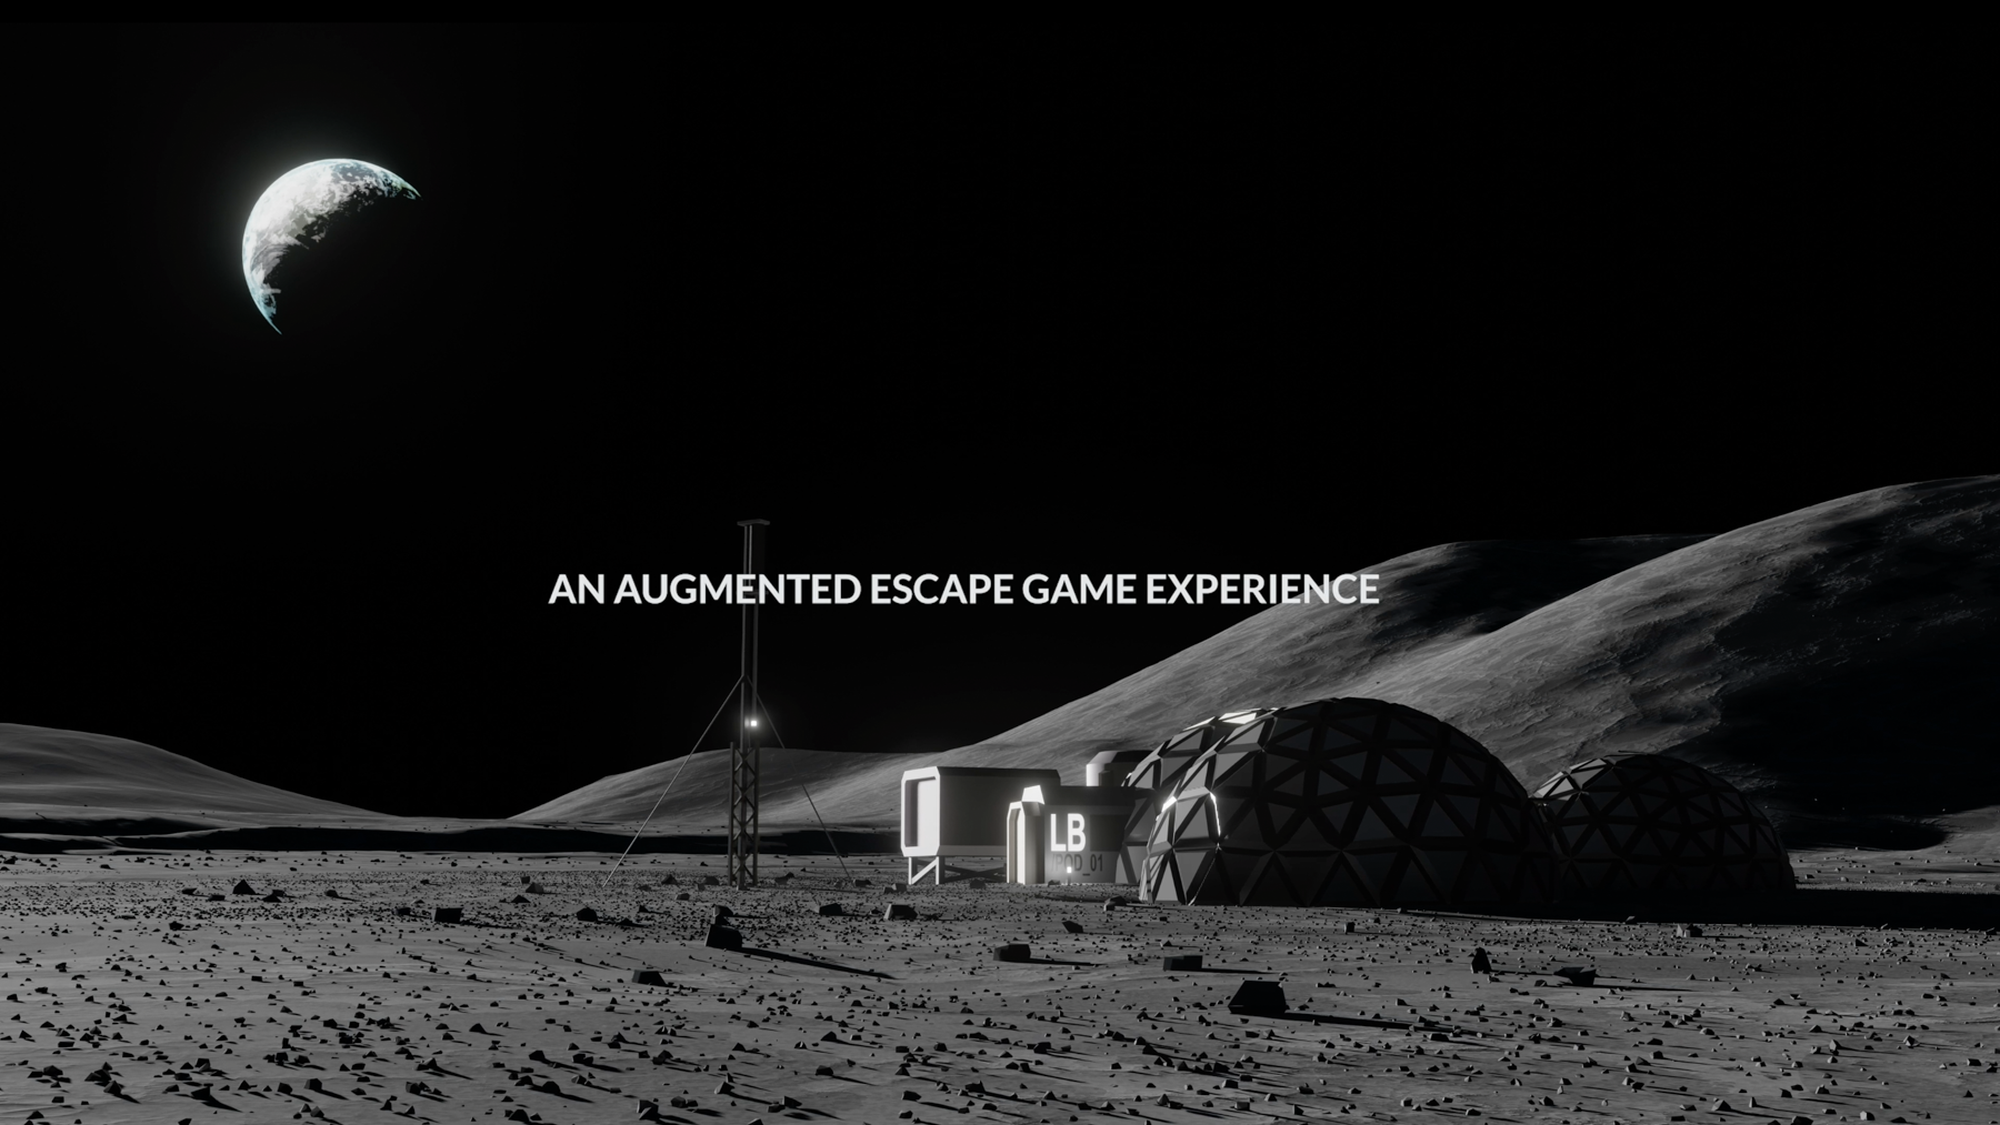 Lunar Base of the Tranquility Base digital space escape game by Space@yourService © Space@yourService/Digital Kingdom